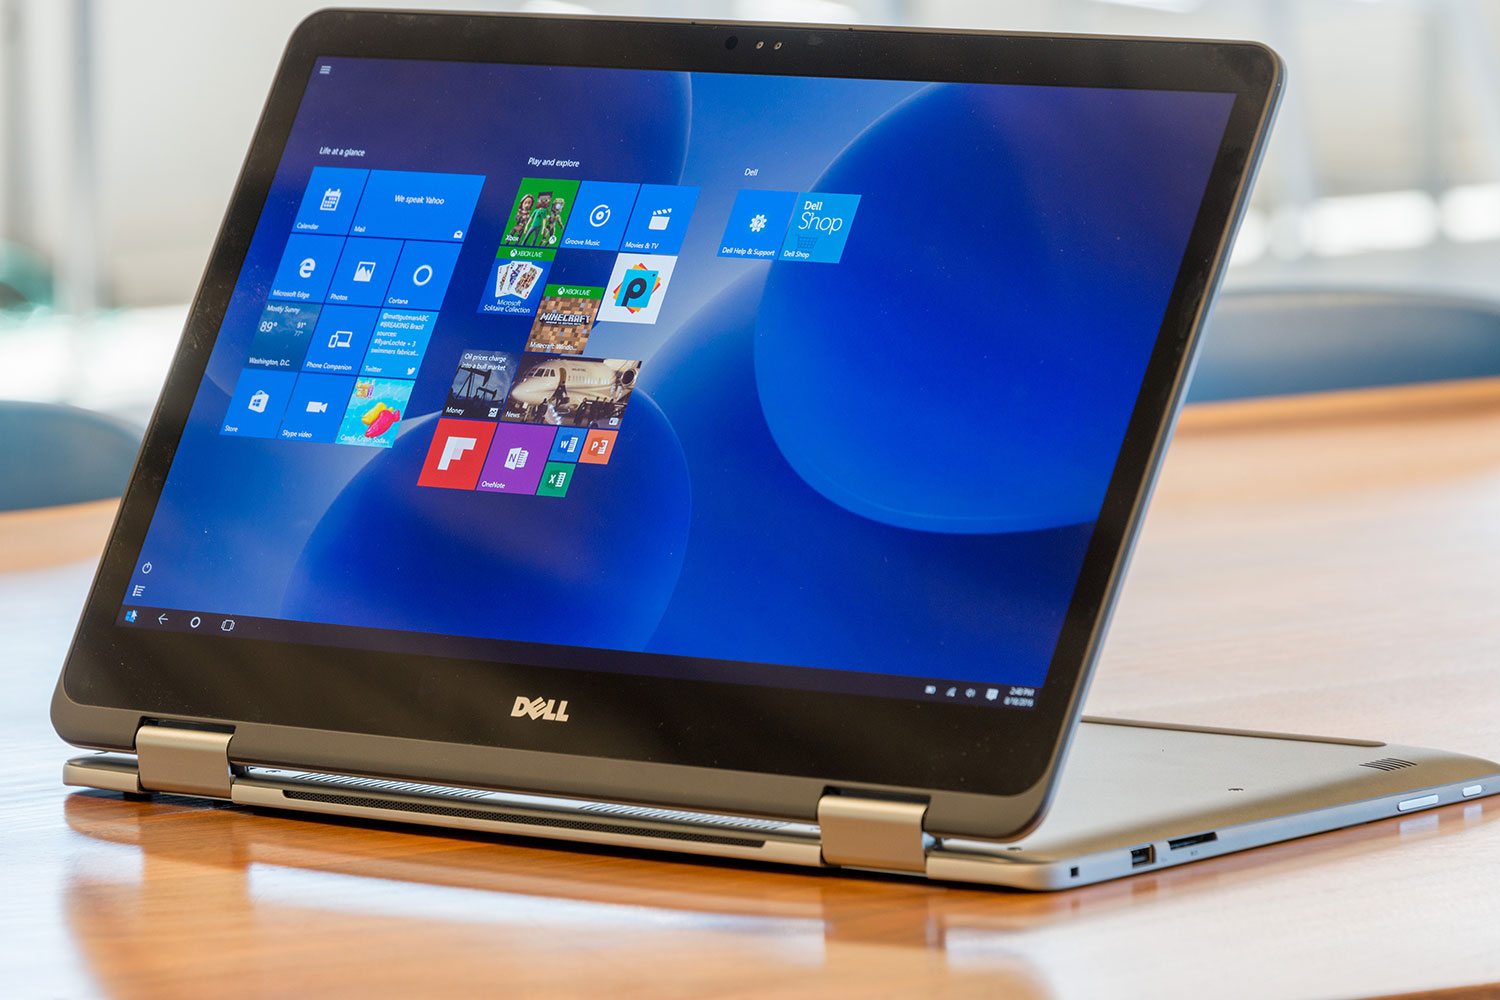 Dell Inspiron 17 7000 2-in-1 (2016) Review | Digital Trends